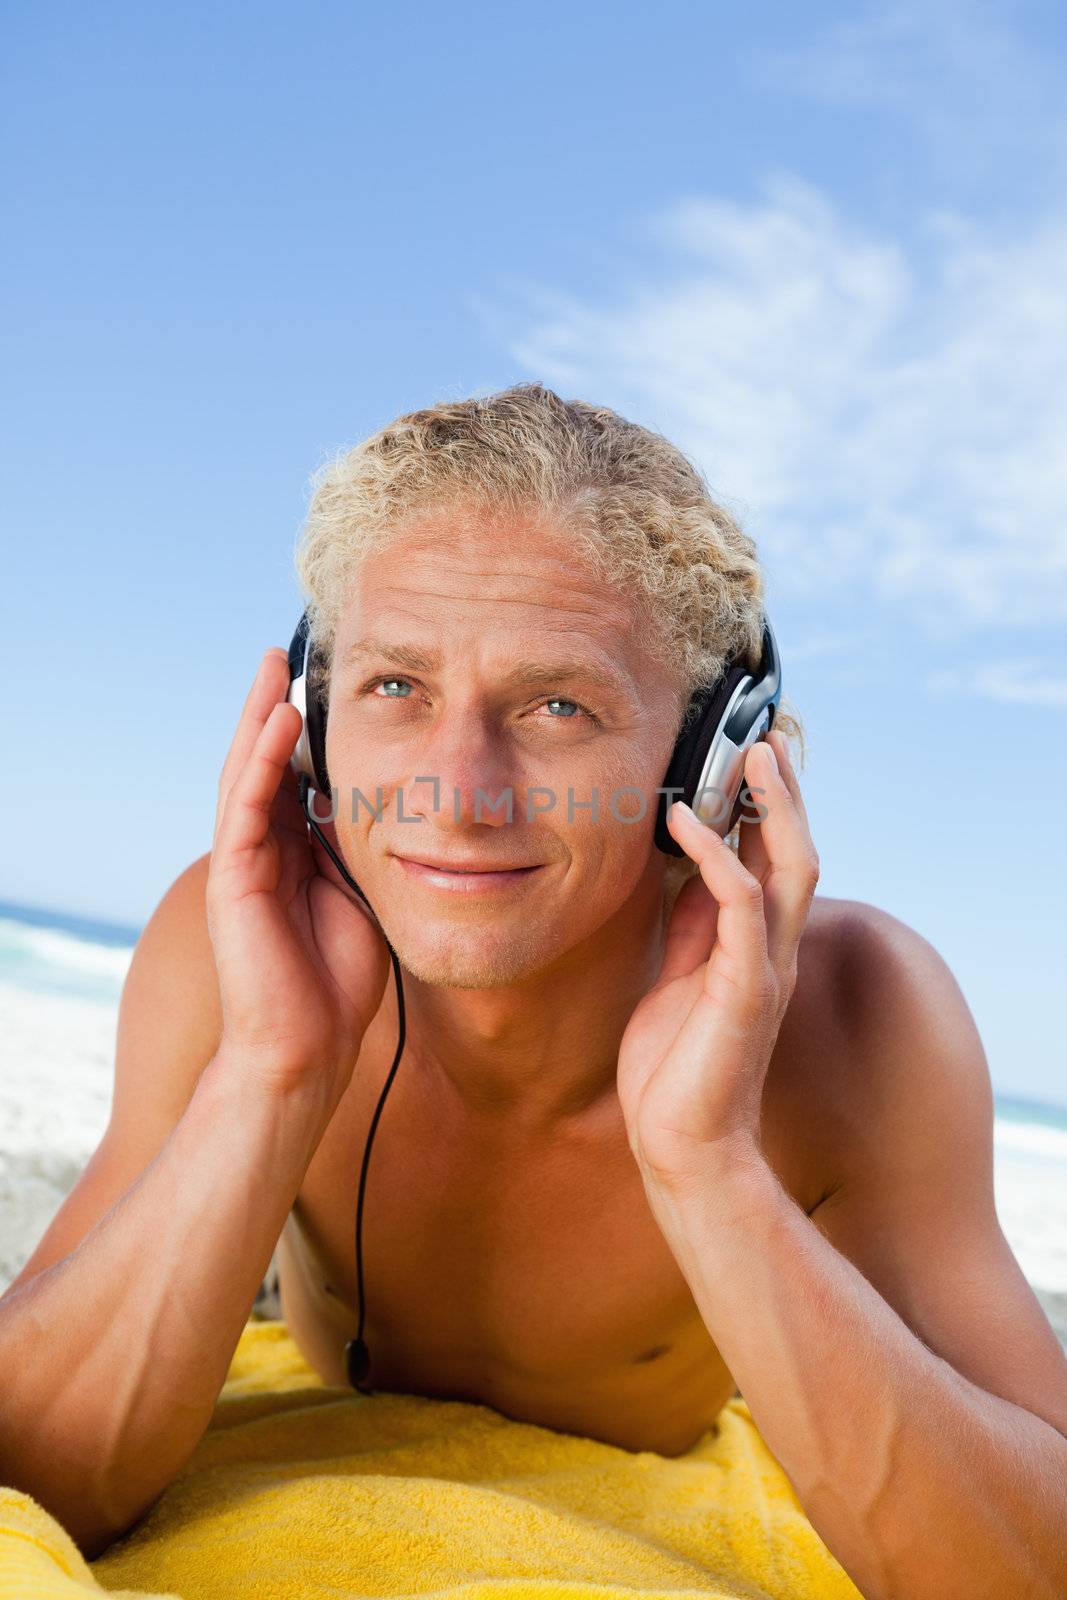 Smiling young man lying on his yellow beach towel while listening to music by Wavebreakmedia